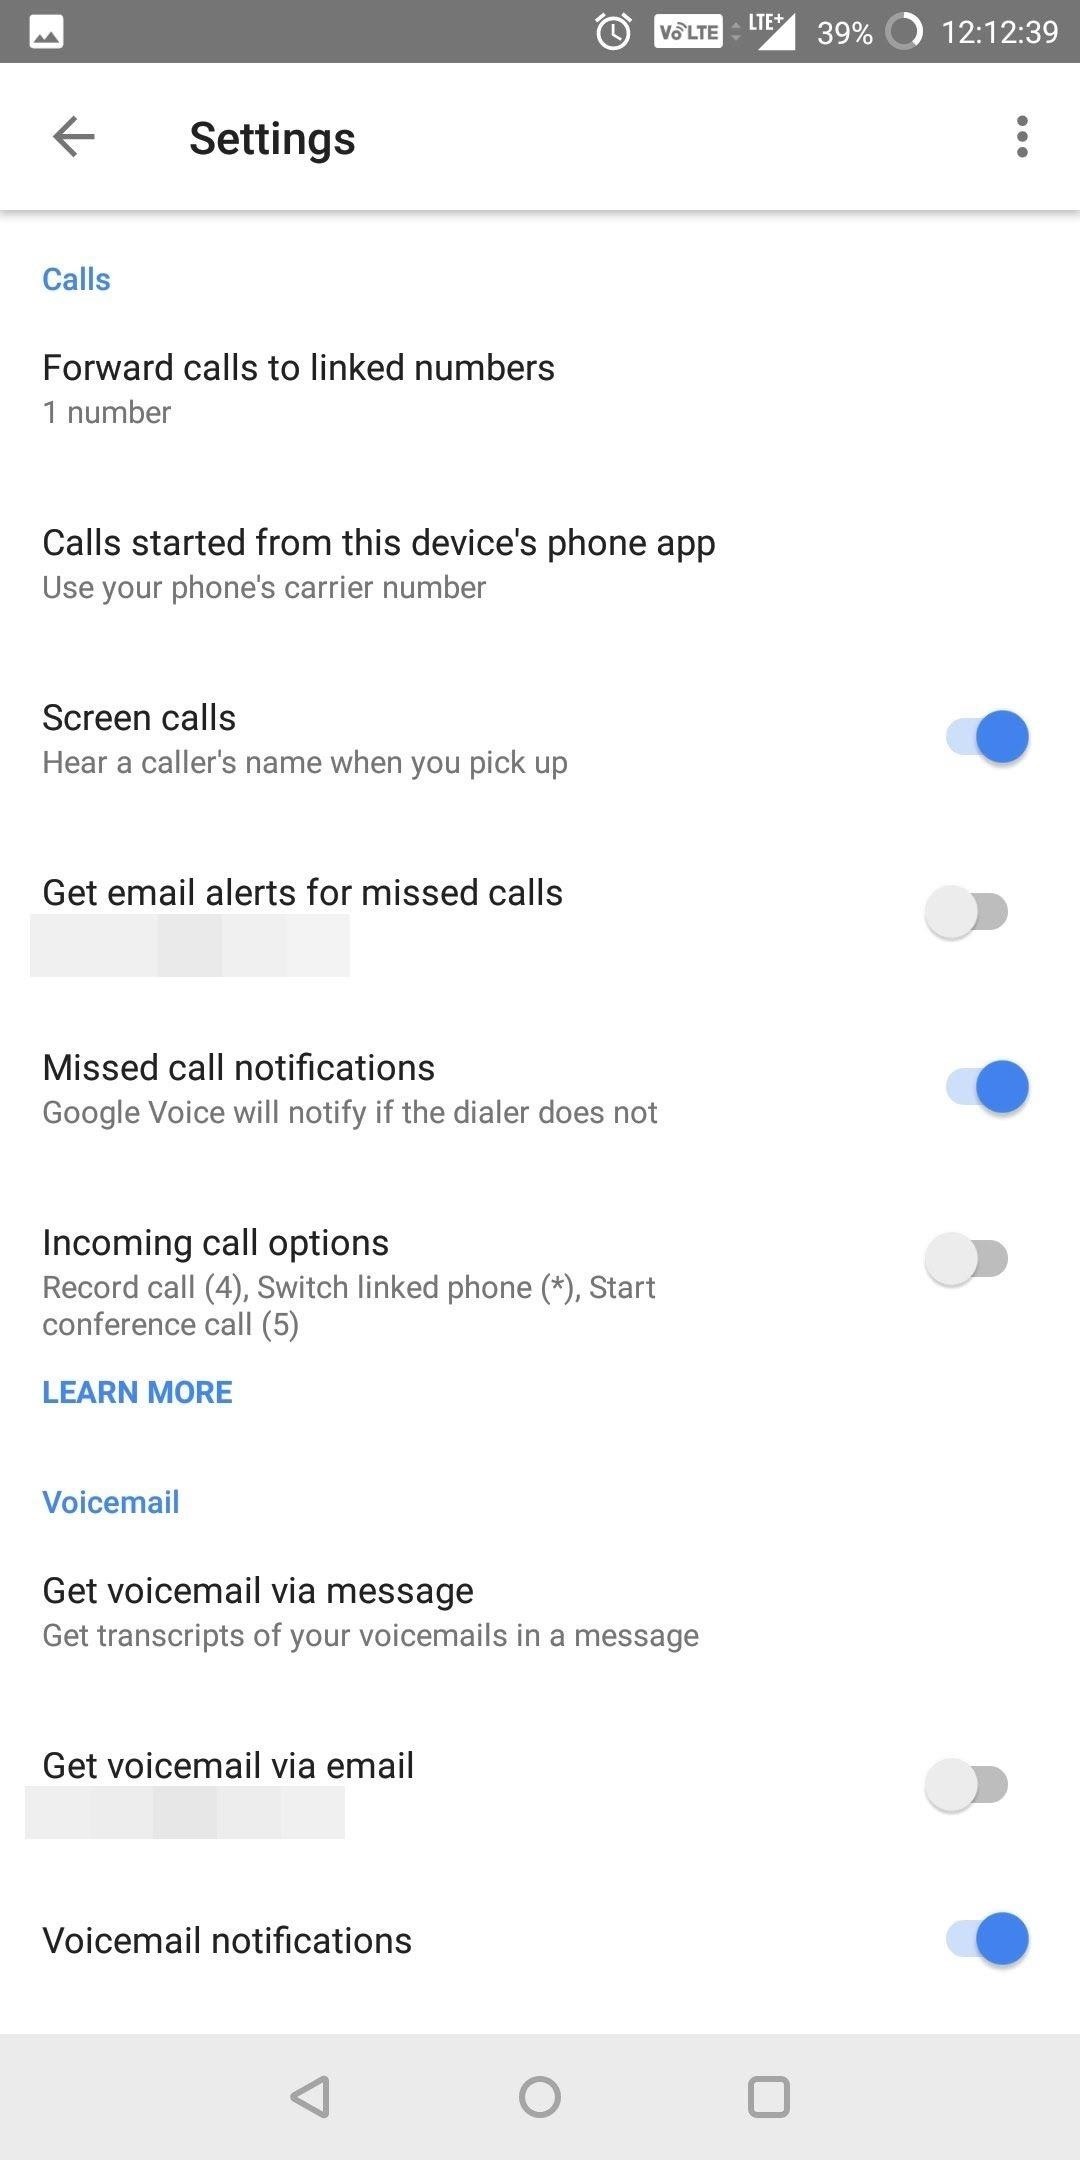 How to Use Google Voice as a 'Burner' Number